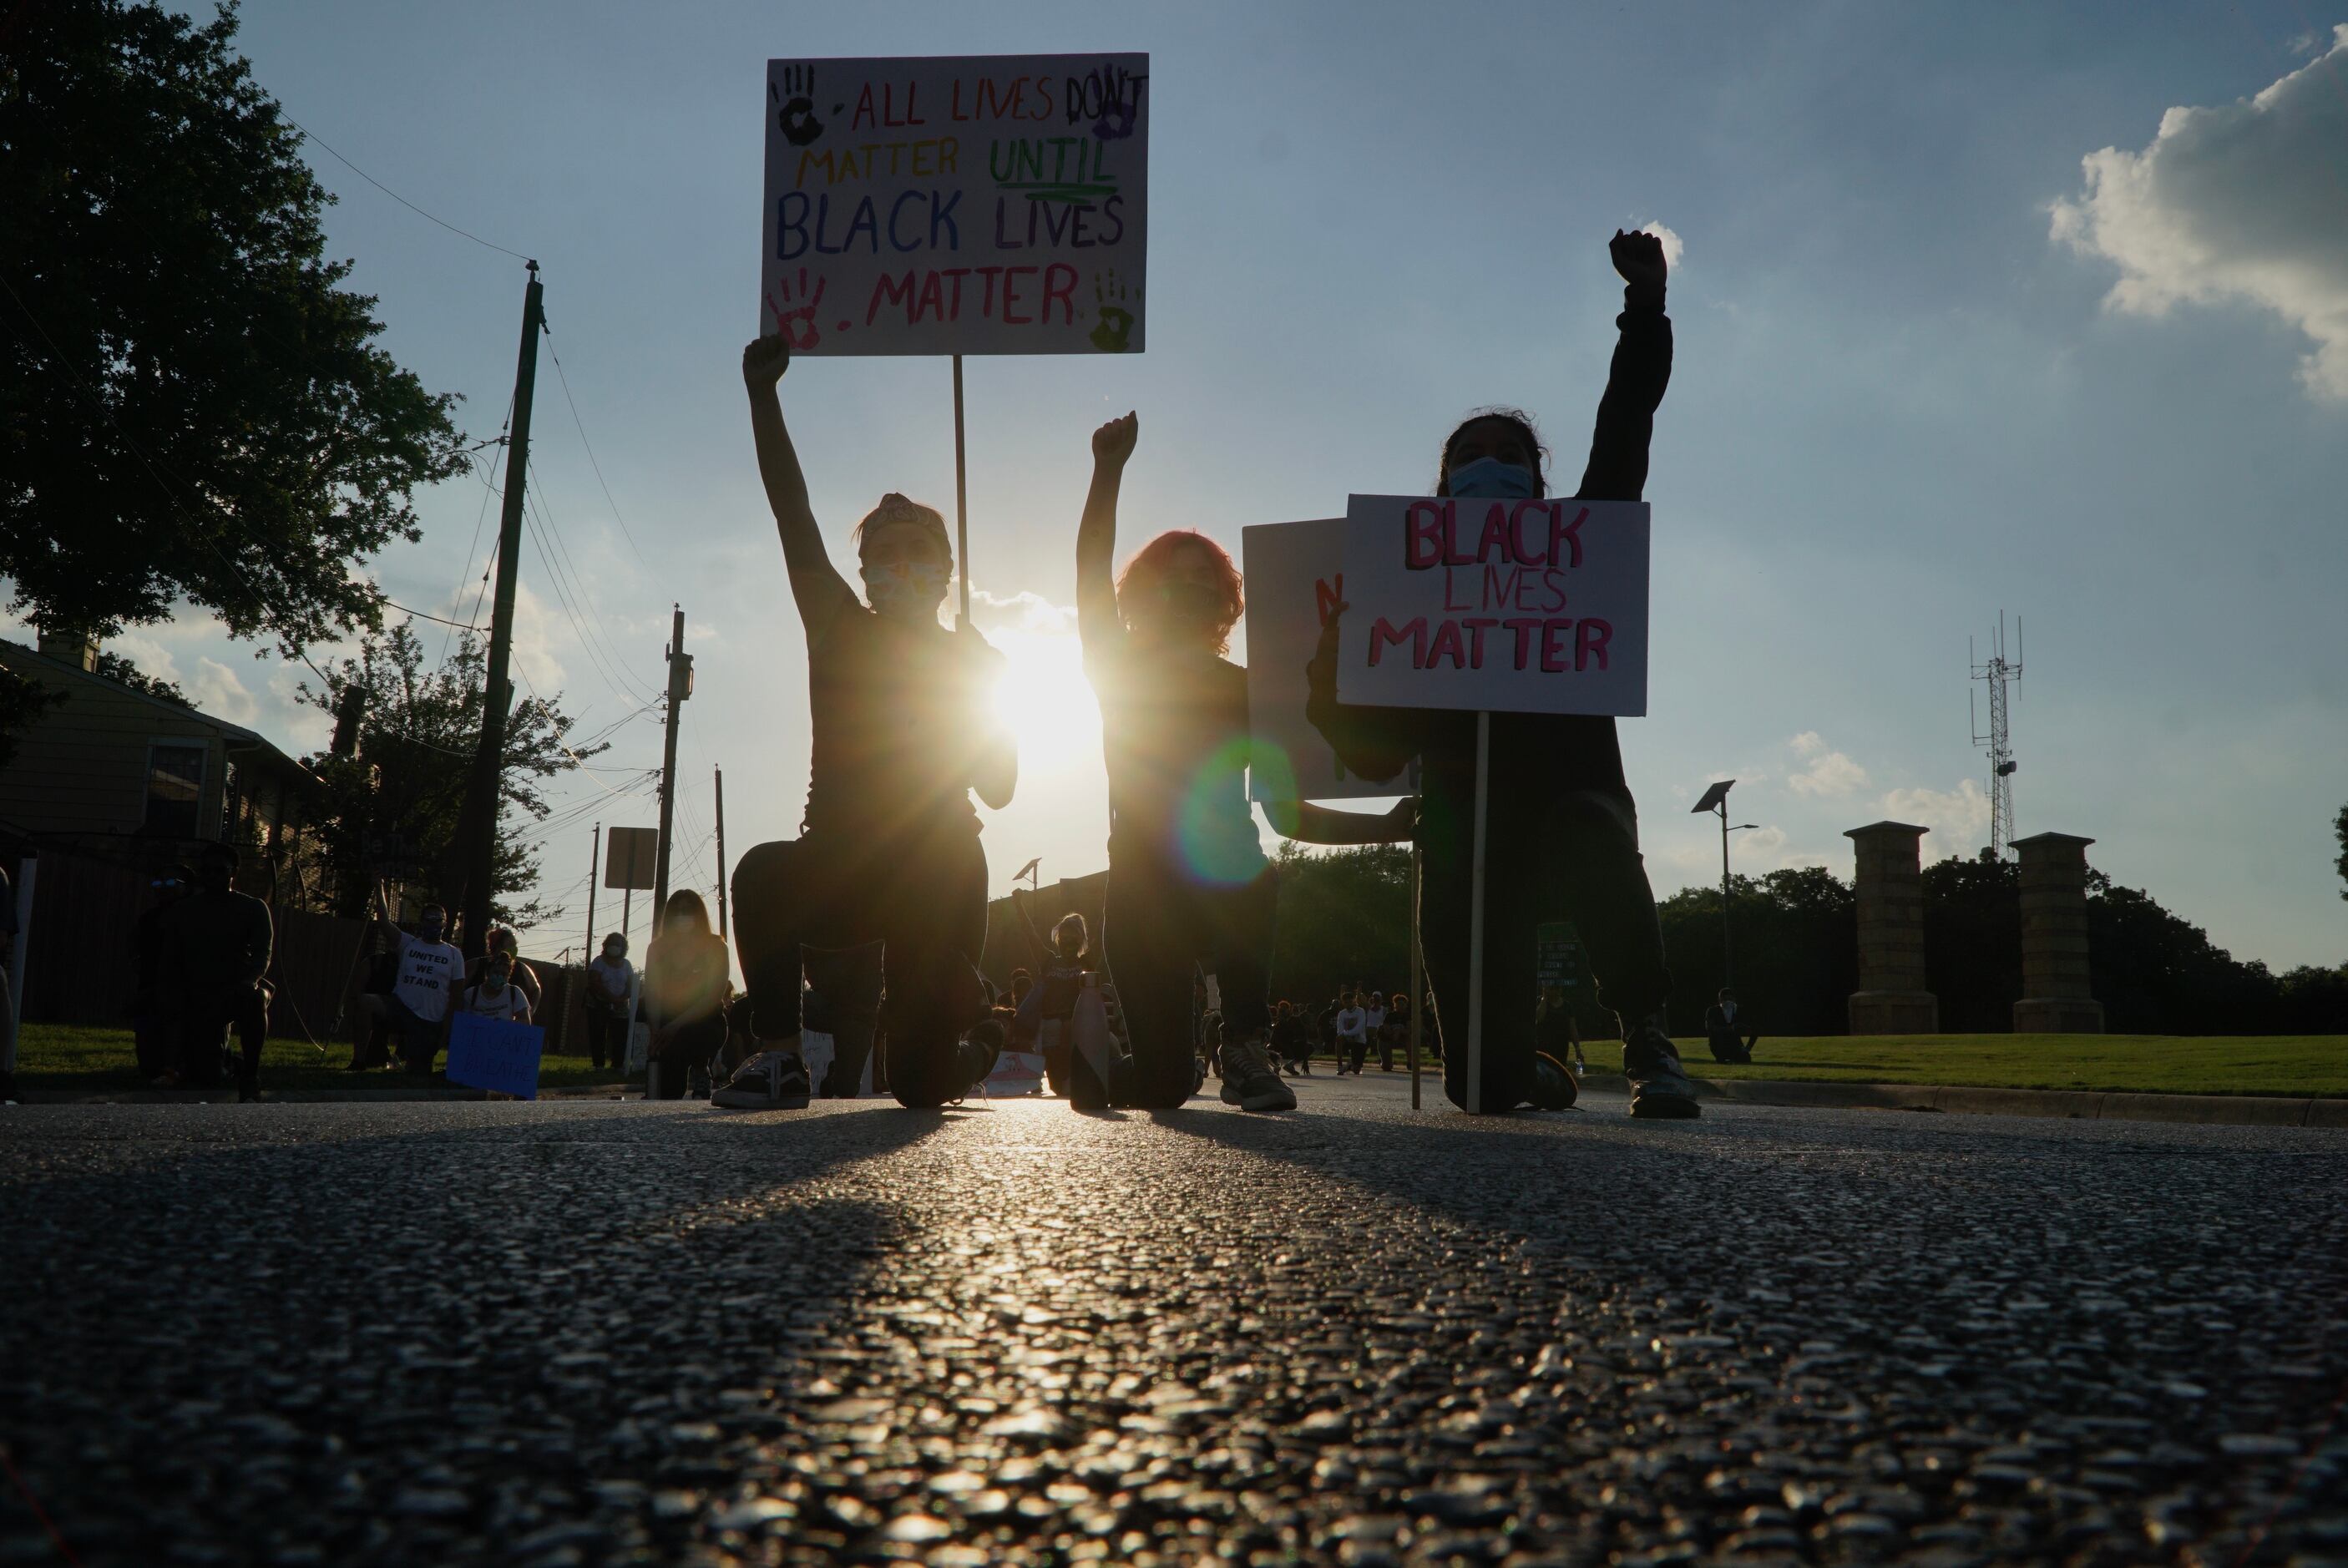 Hundreds of people marched in a protest in Irving, Texas on Monday, June 8, 2020. The...